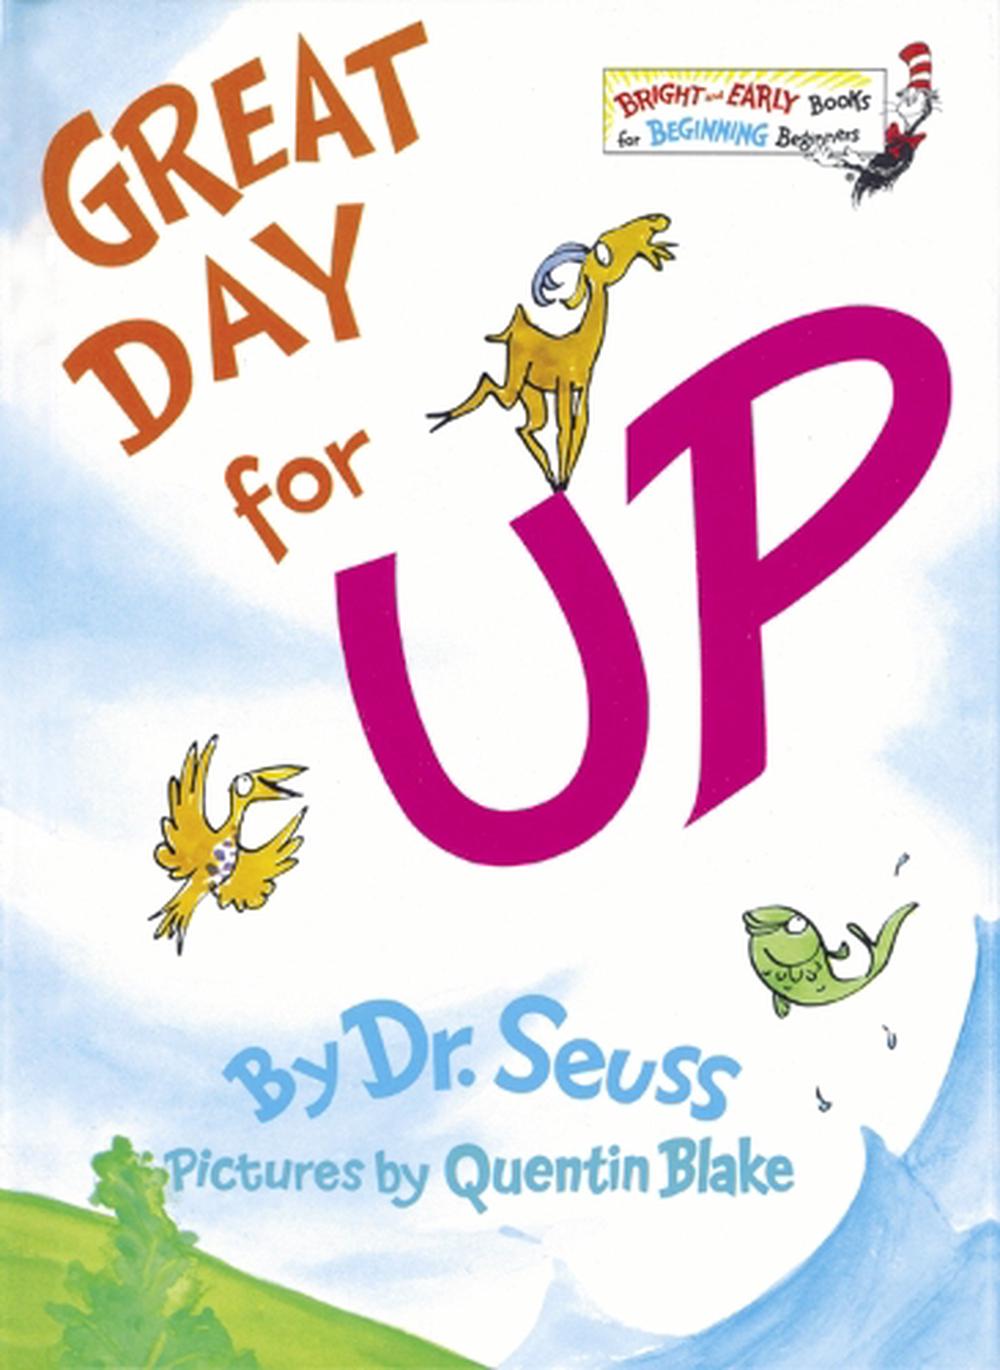 Great Day for Up! by Dr Seuss (English) Hardcover Book Free Shipping ...